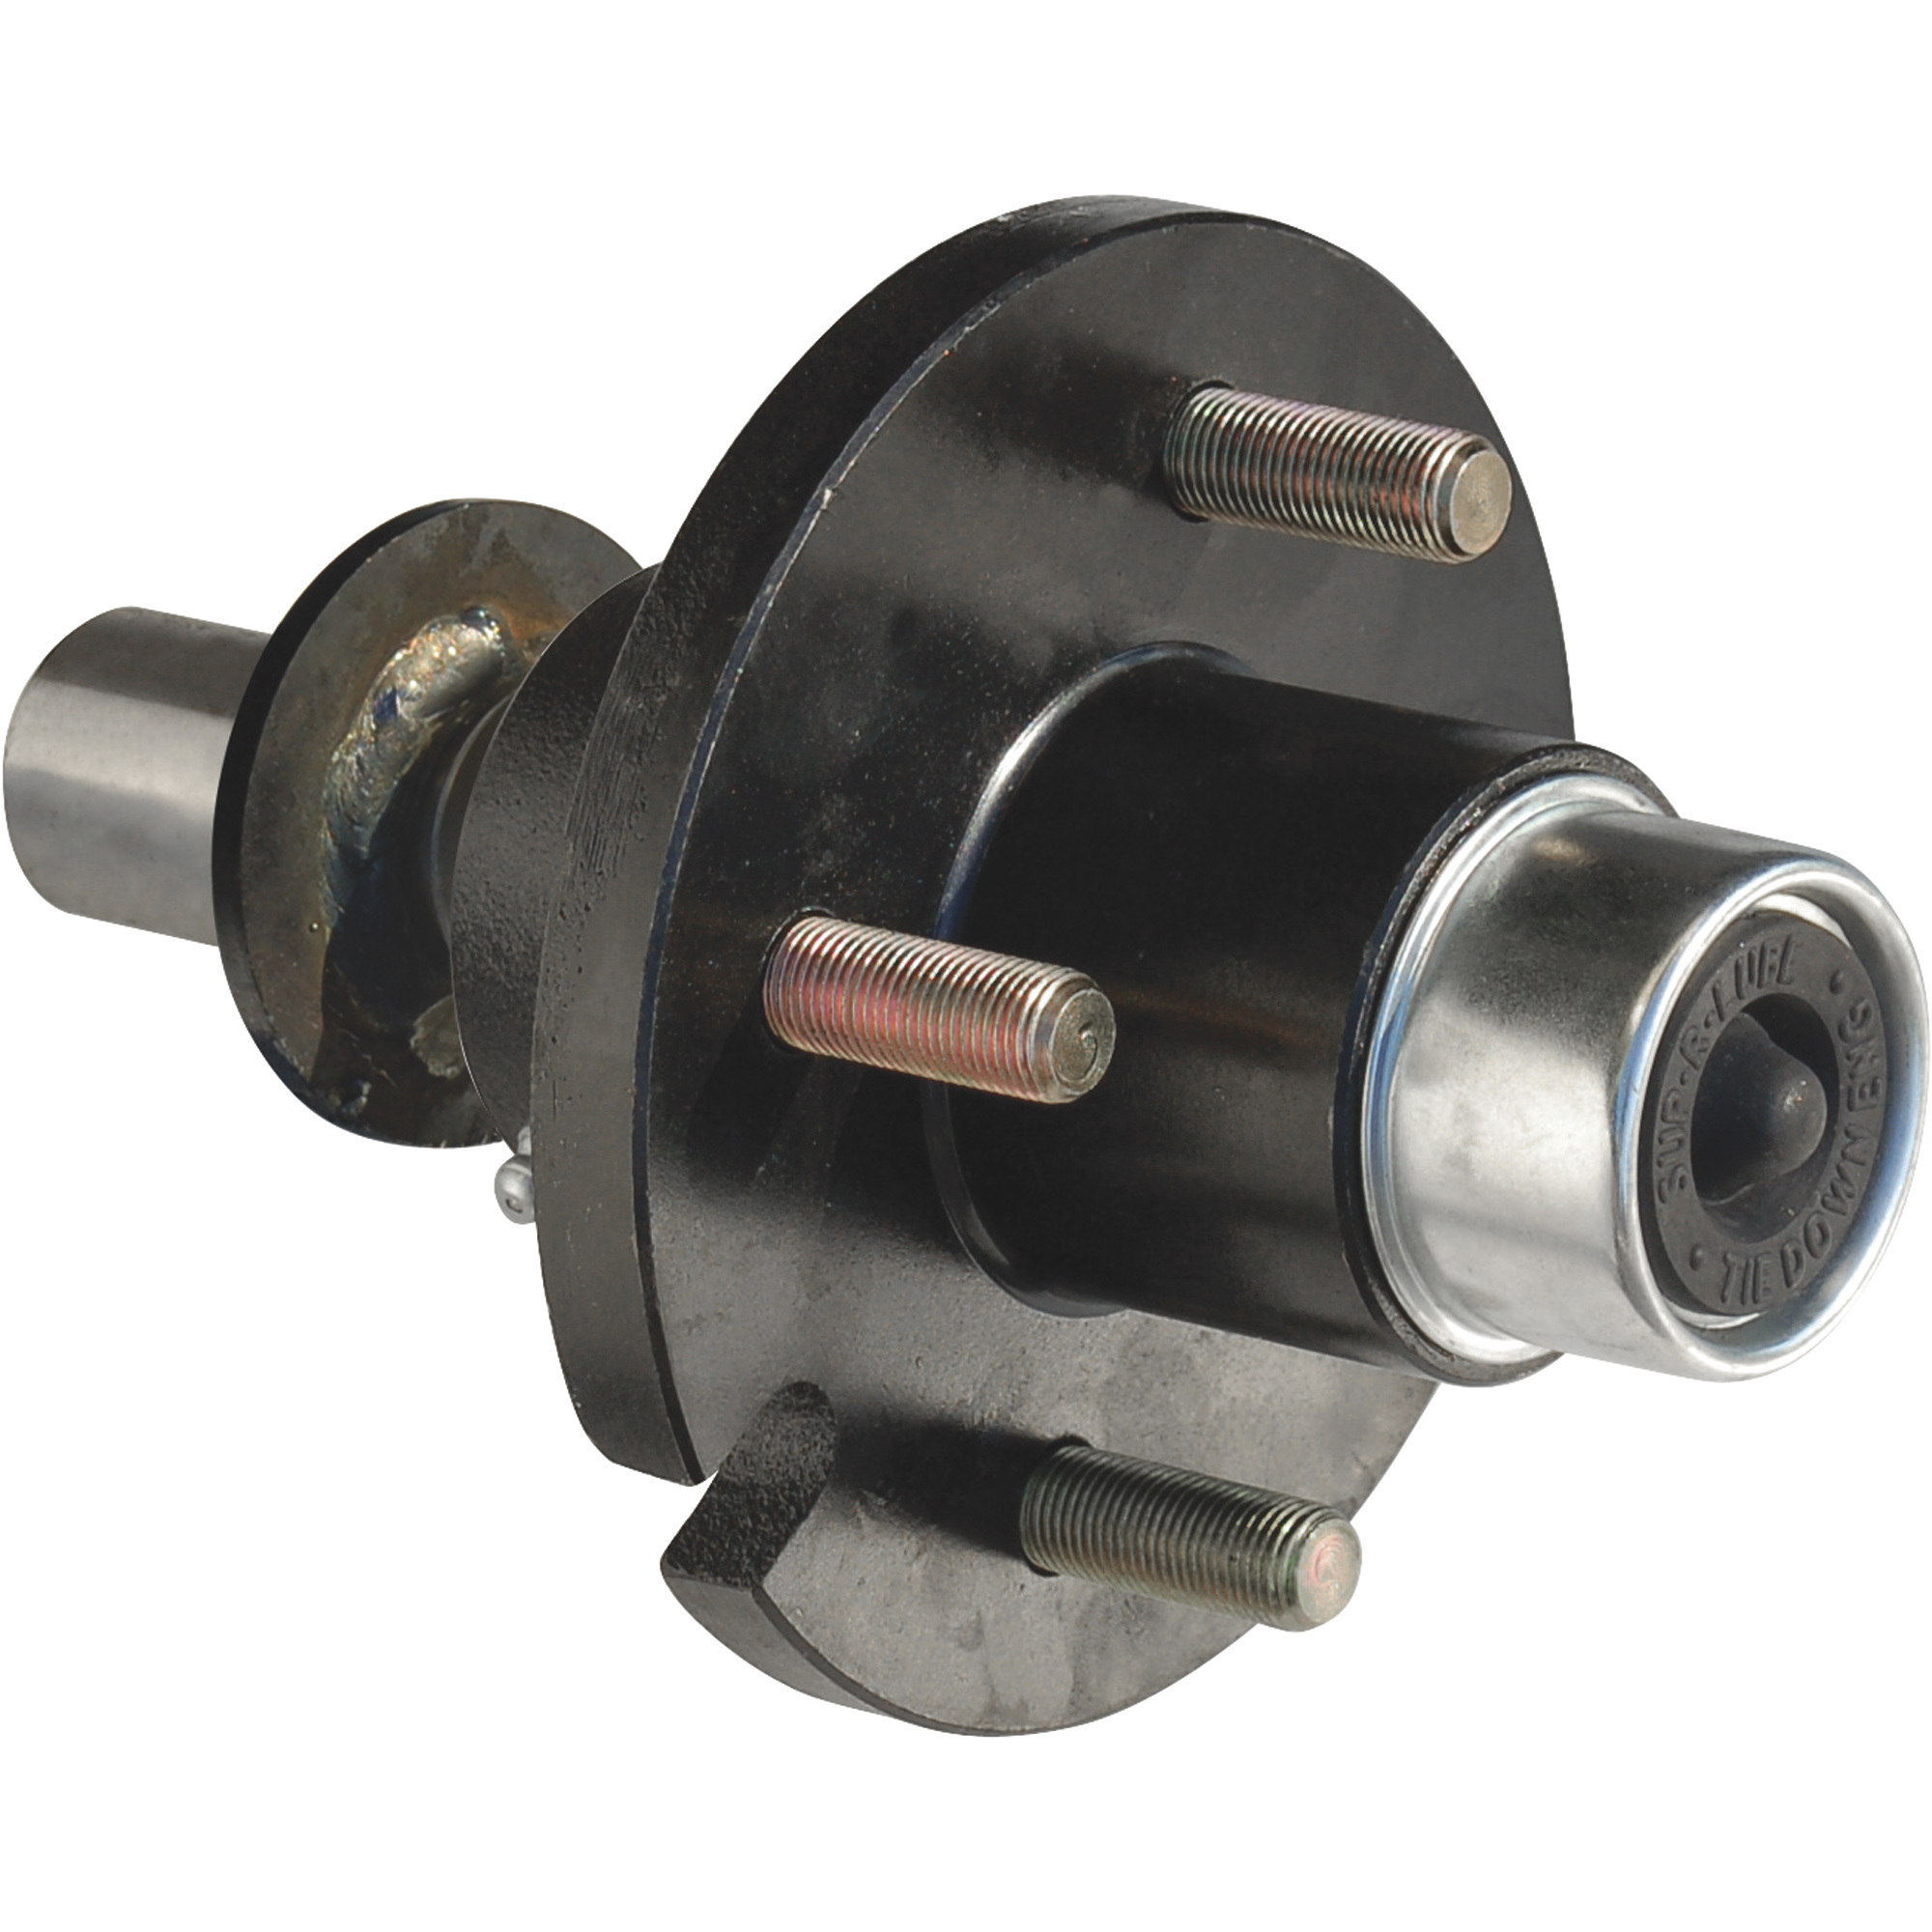 Dexter 4-Lug Hub/Spindle End Unit for Build Your Own Trailer Axle System, 1250-Lb. Capacity Per Hub, Model 80115